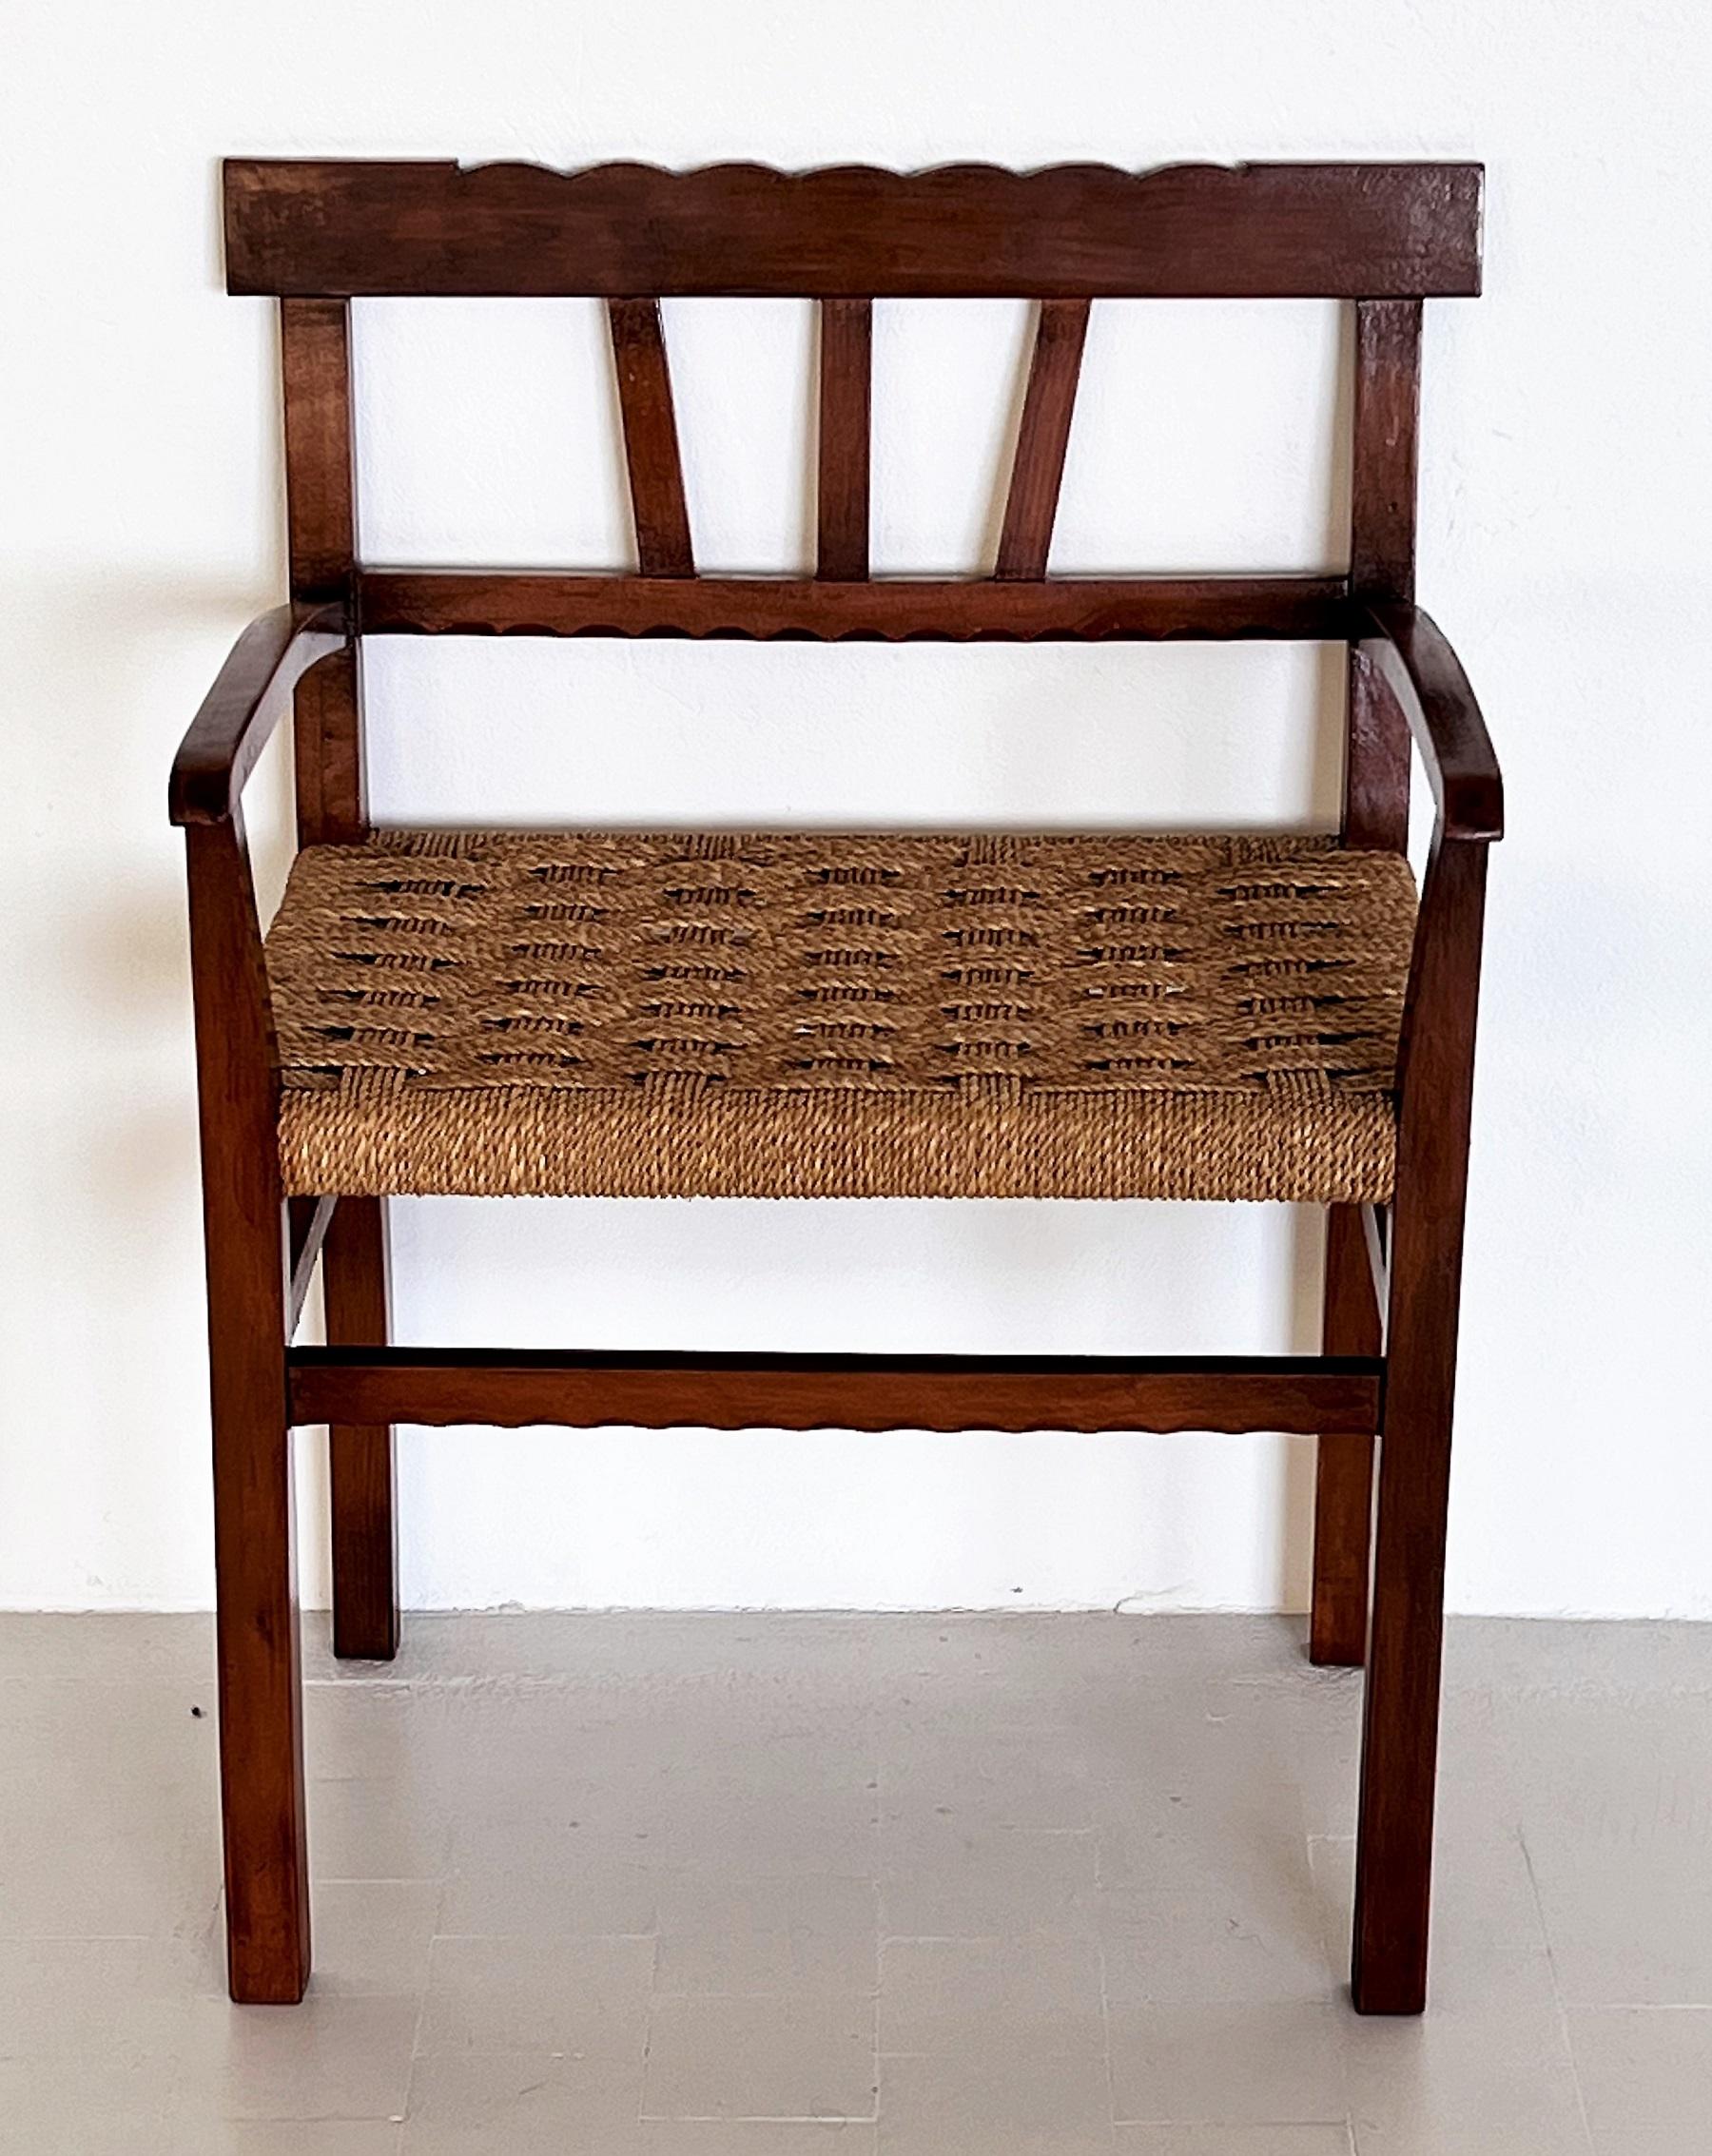 Italian Classic Large Beechwood Chair with Hand-Crafted Rope Seat, 1980s For Sale 2